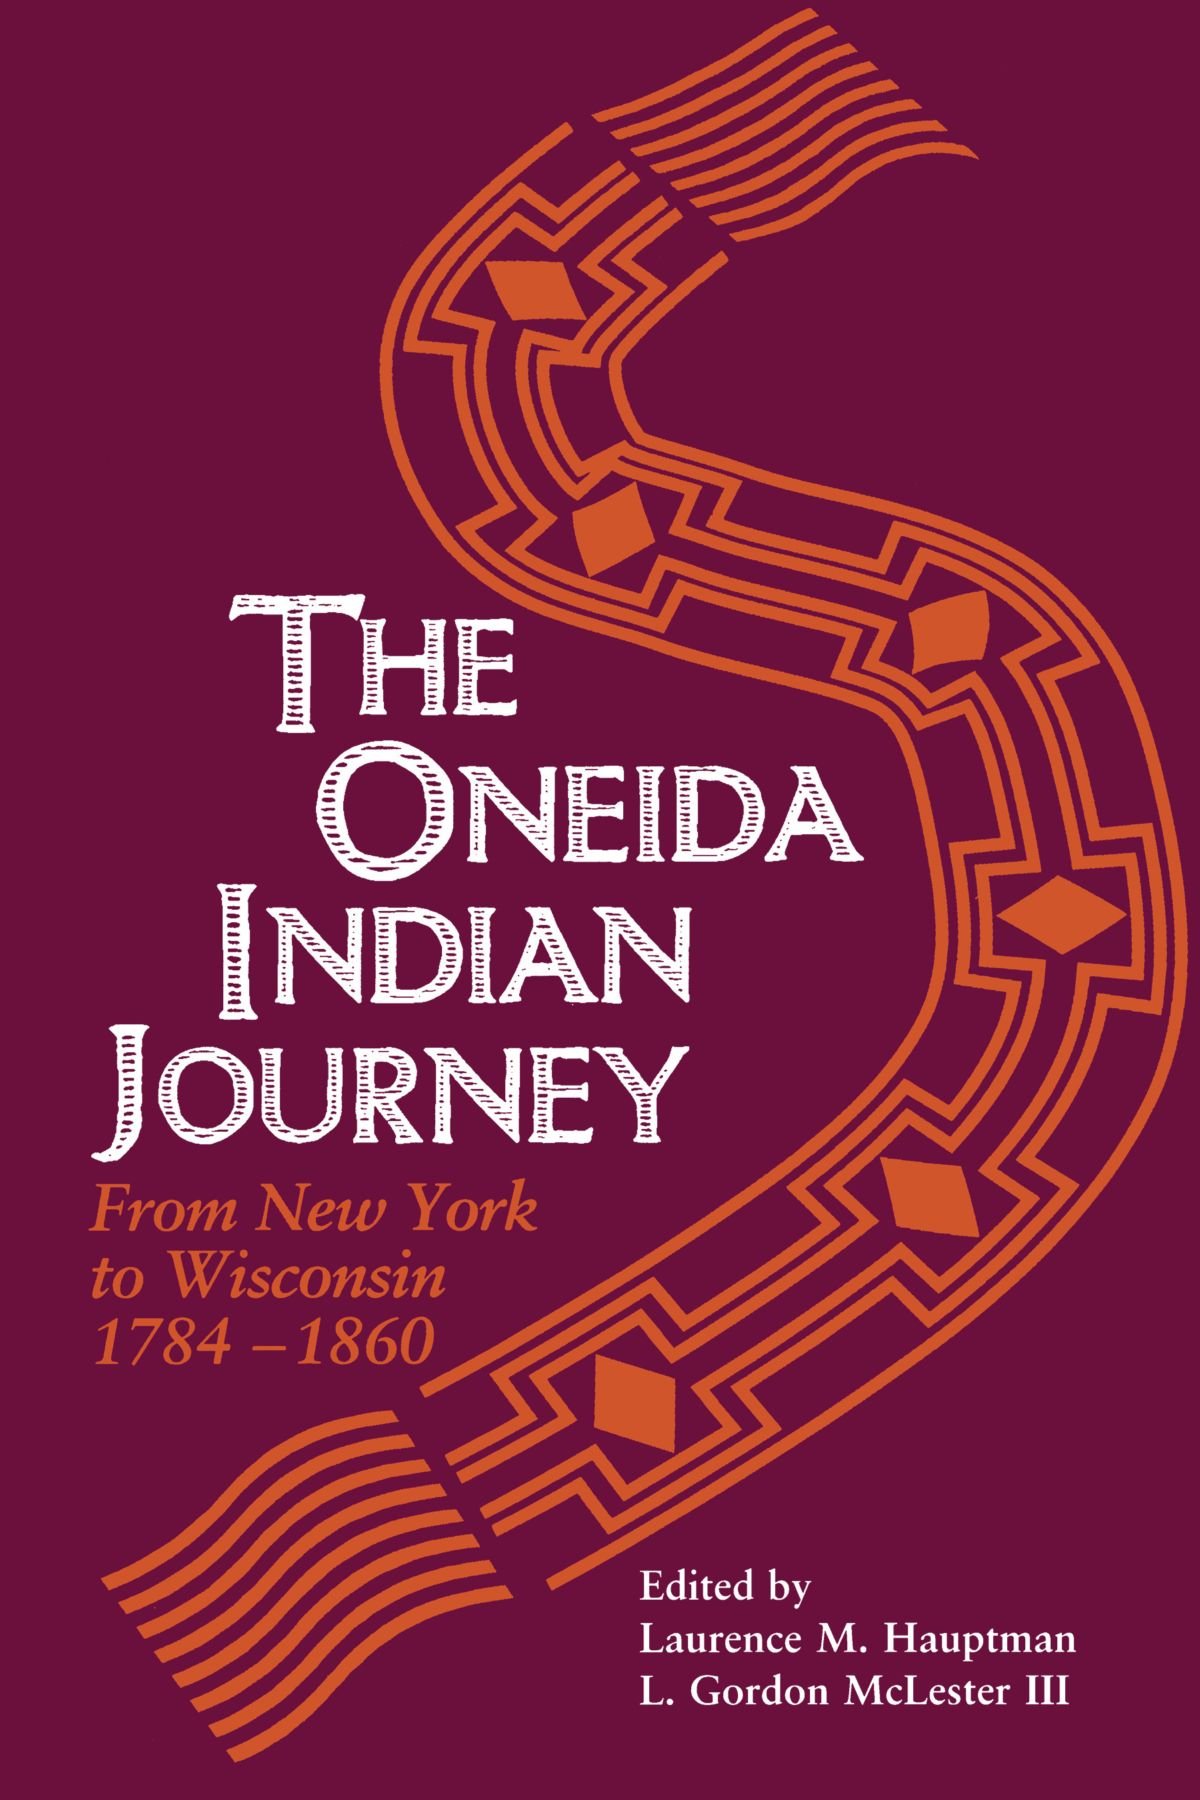 cover of The Oneida Indian Journey is purple, with a gold yellow Native American design element. It is a long narrow element, with diamond shapes enclosed by squares. The ends of the shape appear to be fringed.